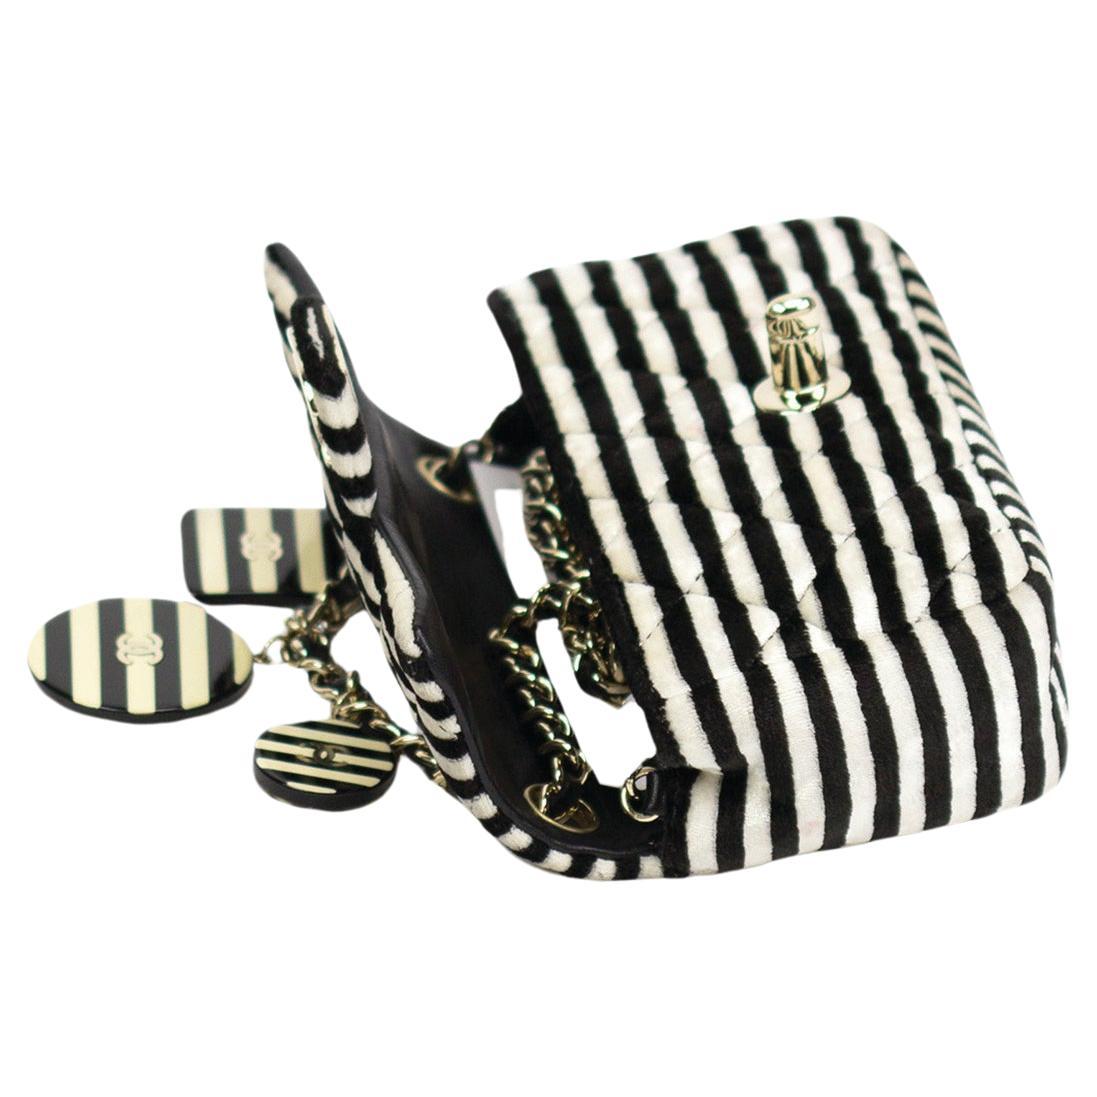 Mini striped velour cross body flap

2006 {VINTAGE 16 Years}
Silver hardware
Three hanging CC charms
Interior black nylon and calfskin lining
3